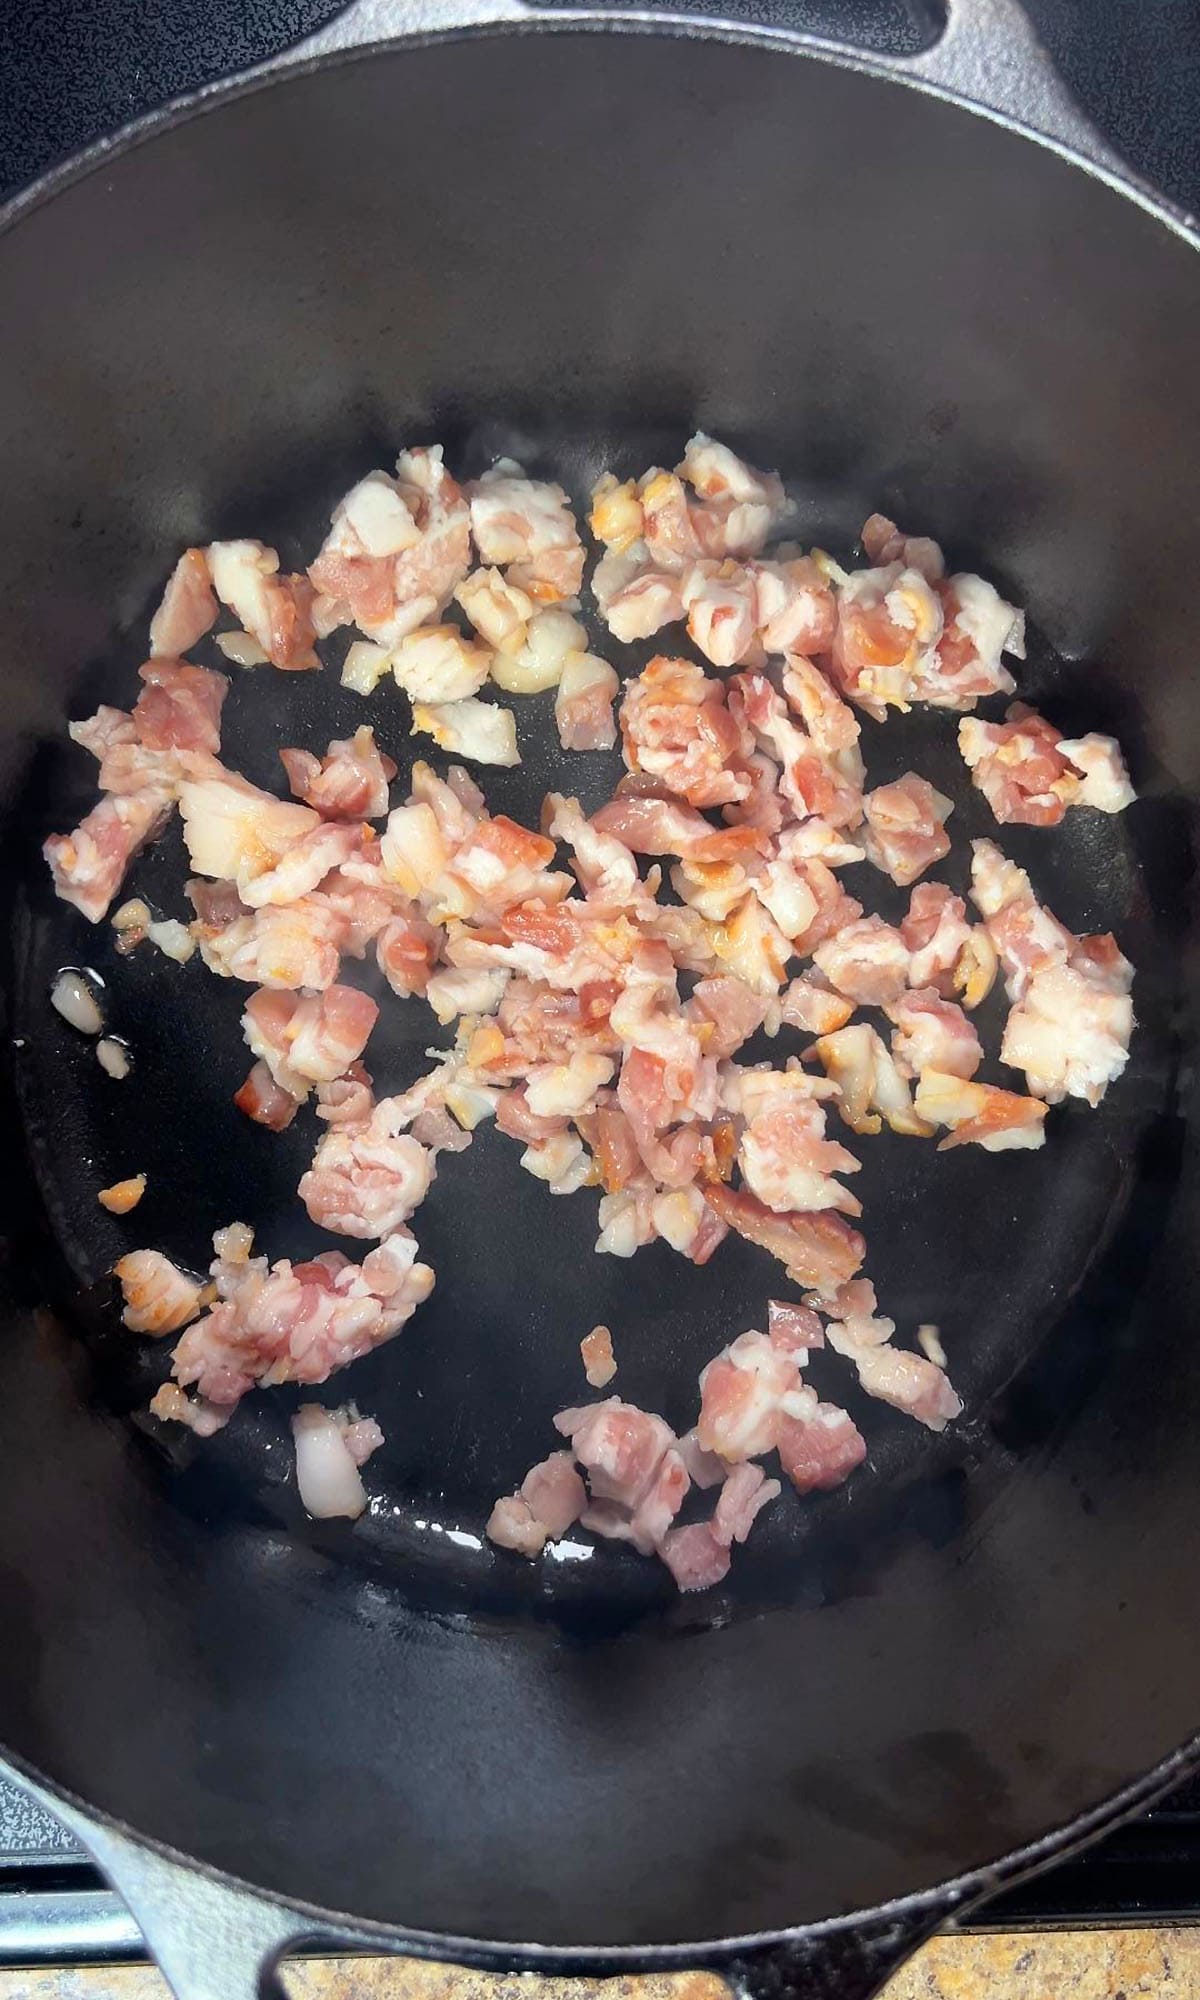 Cooking the bacon pieces in a large Dutch oven.